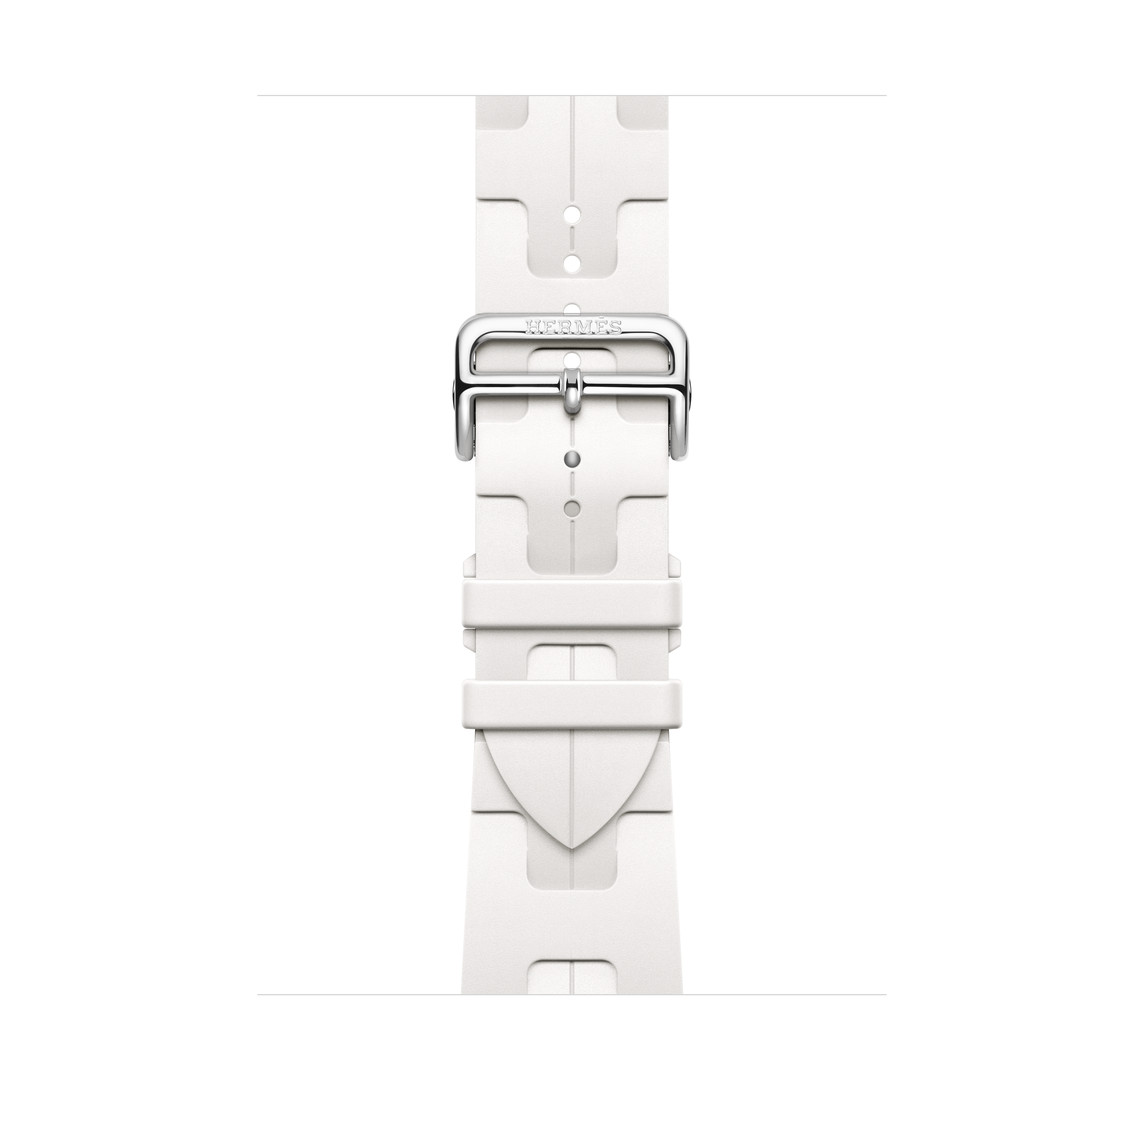 Blanc (white) Kilim Single Tour strap, woven textile with silver stainless steel buckle.